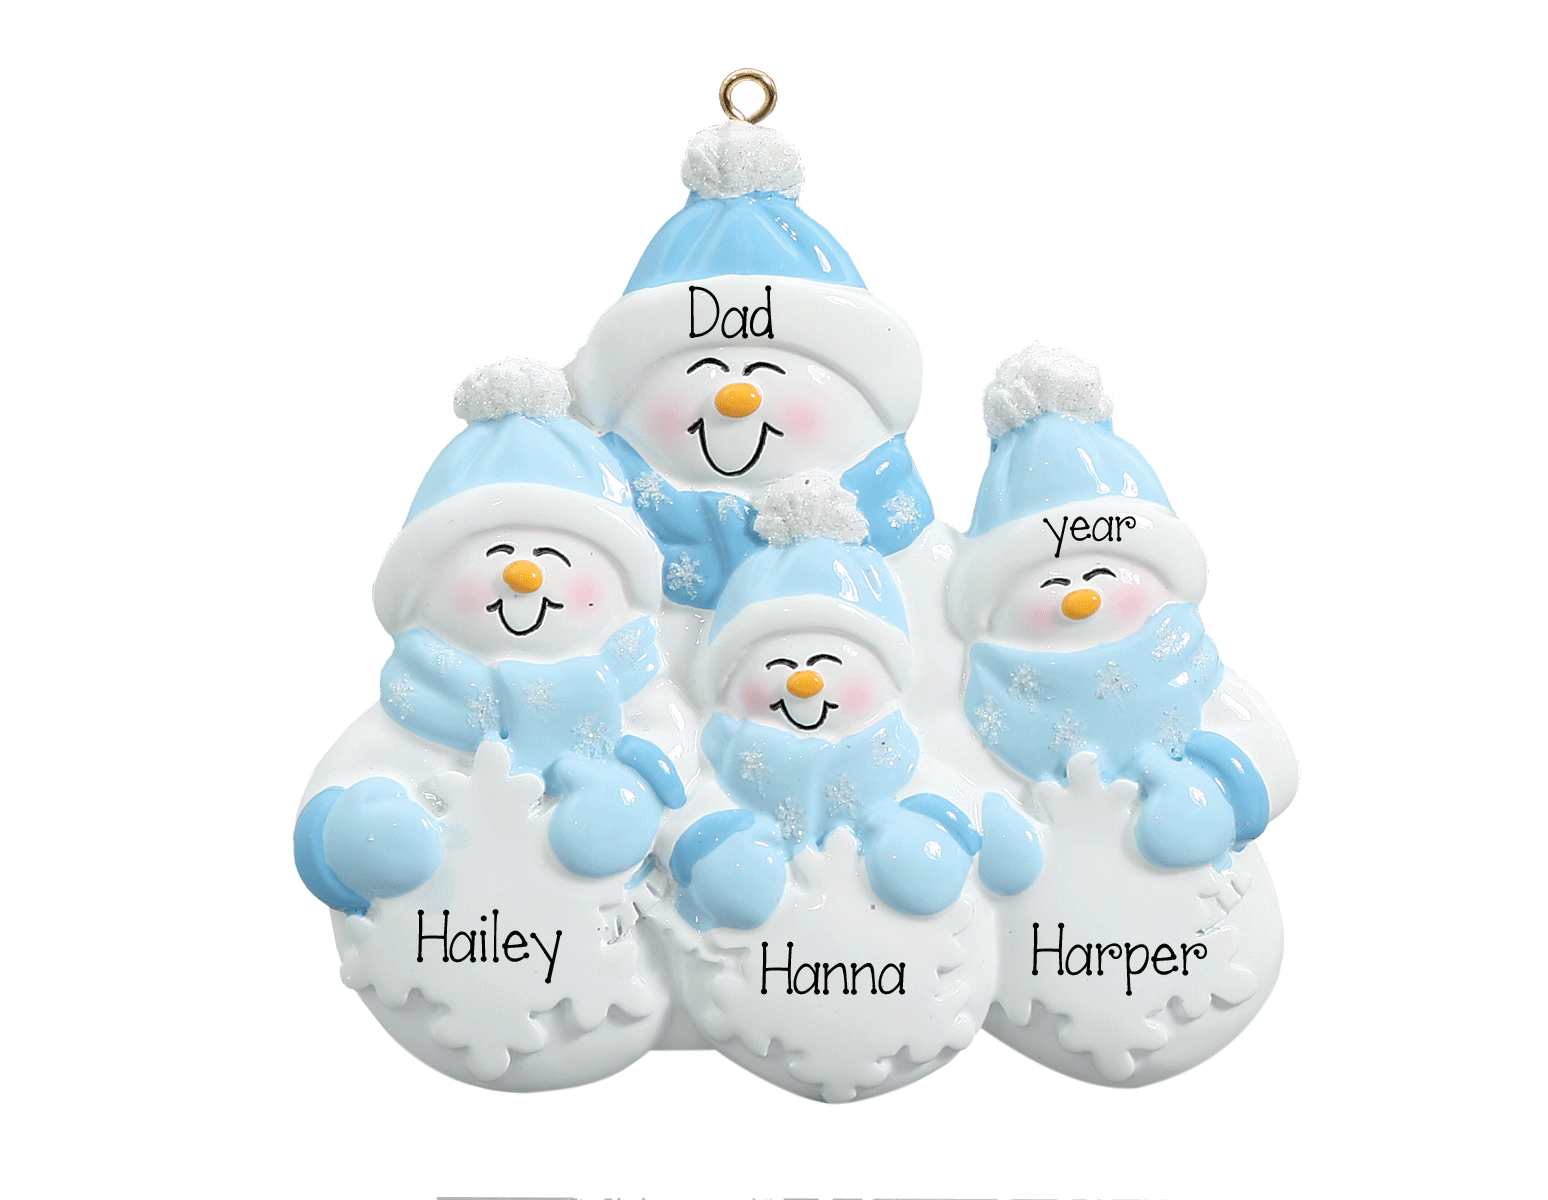 Single Parent with 3 children Ornament, My Personalized Ornaments